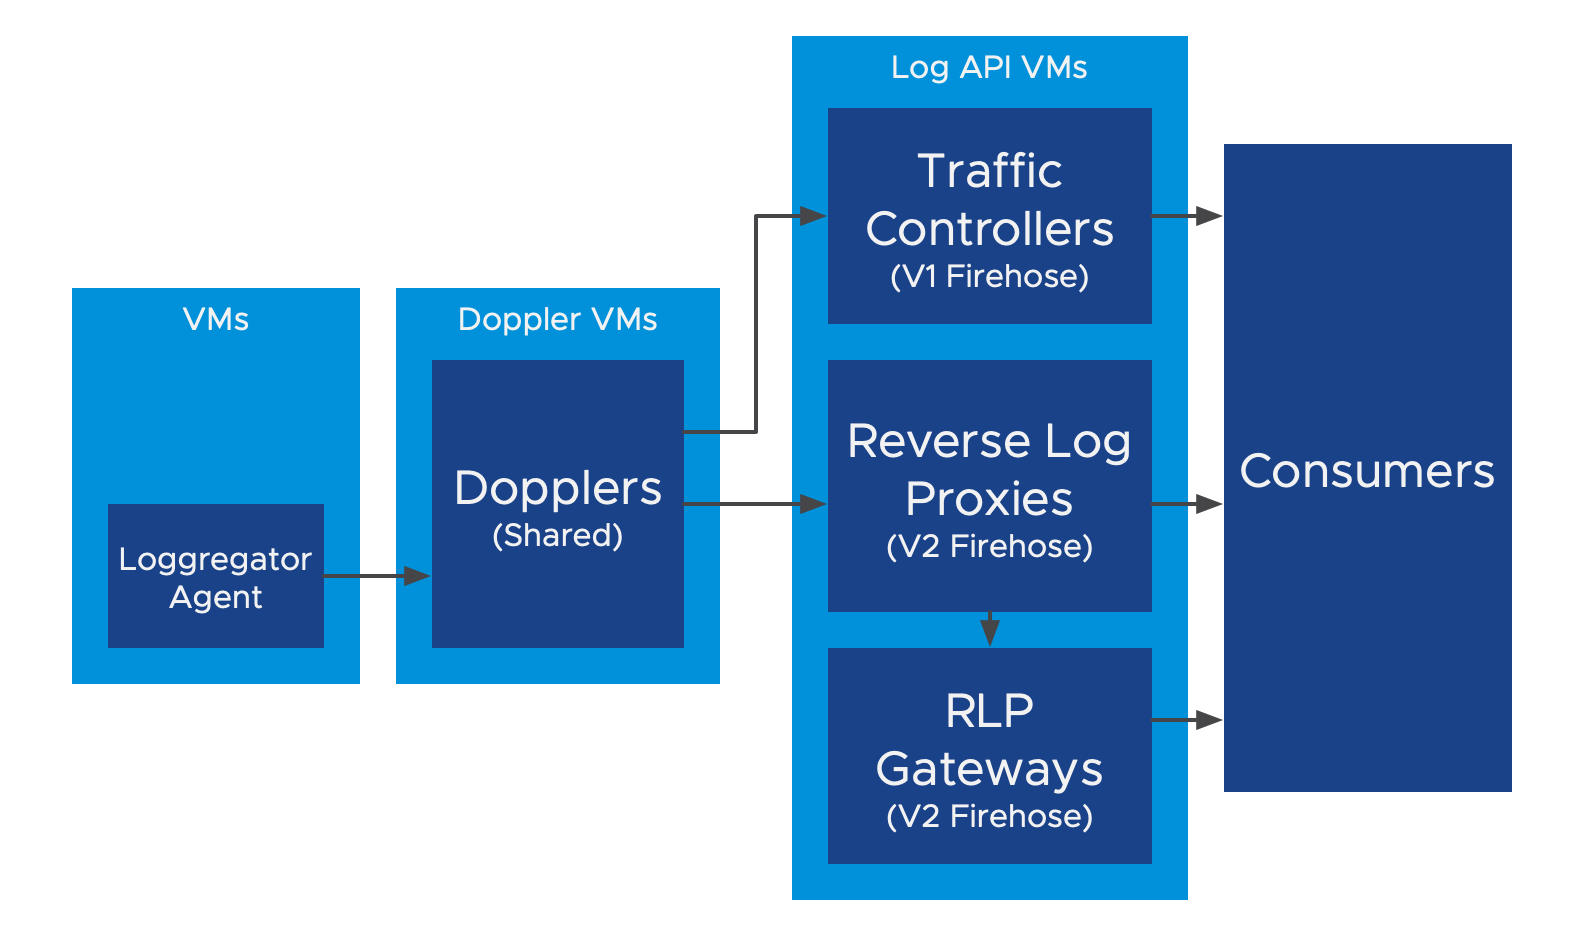 A Loggregator Agent appears inside a square labeled
VMs. Loggregator Agents send to Dopplers, located on Doppler VMs. Dopplers, in turn, send to both
Traffic Controllers and Reverse Log Proxies. V1 Firehose Consumers receive logs and metrics from
Traffic Controllers, whereas V2 Firehose Consumers receive logs and metrics from Reverse Log
Proxies. V2 Firehose Consumers can also receive logs and metrics from Reverse Log Proxy (RLP) Gateways.